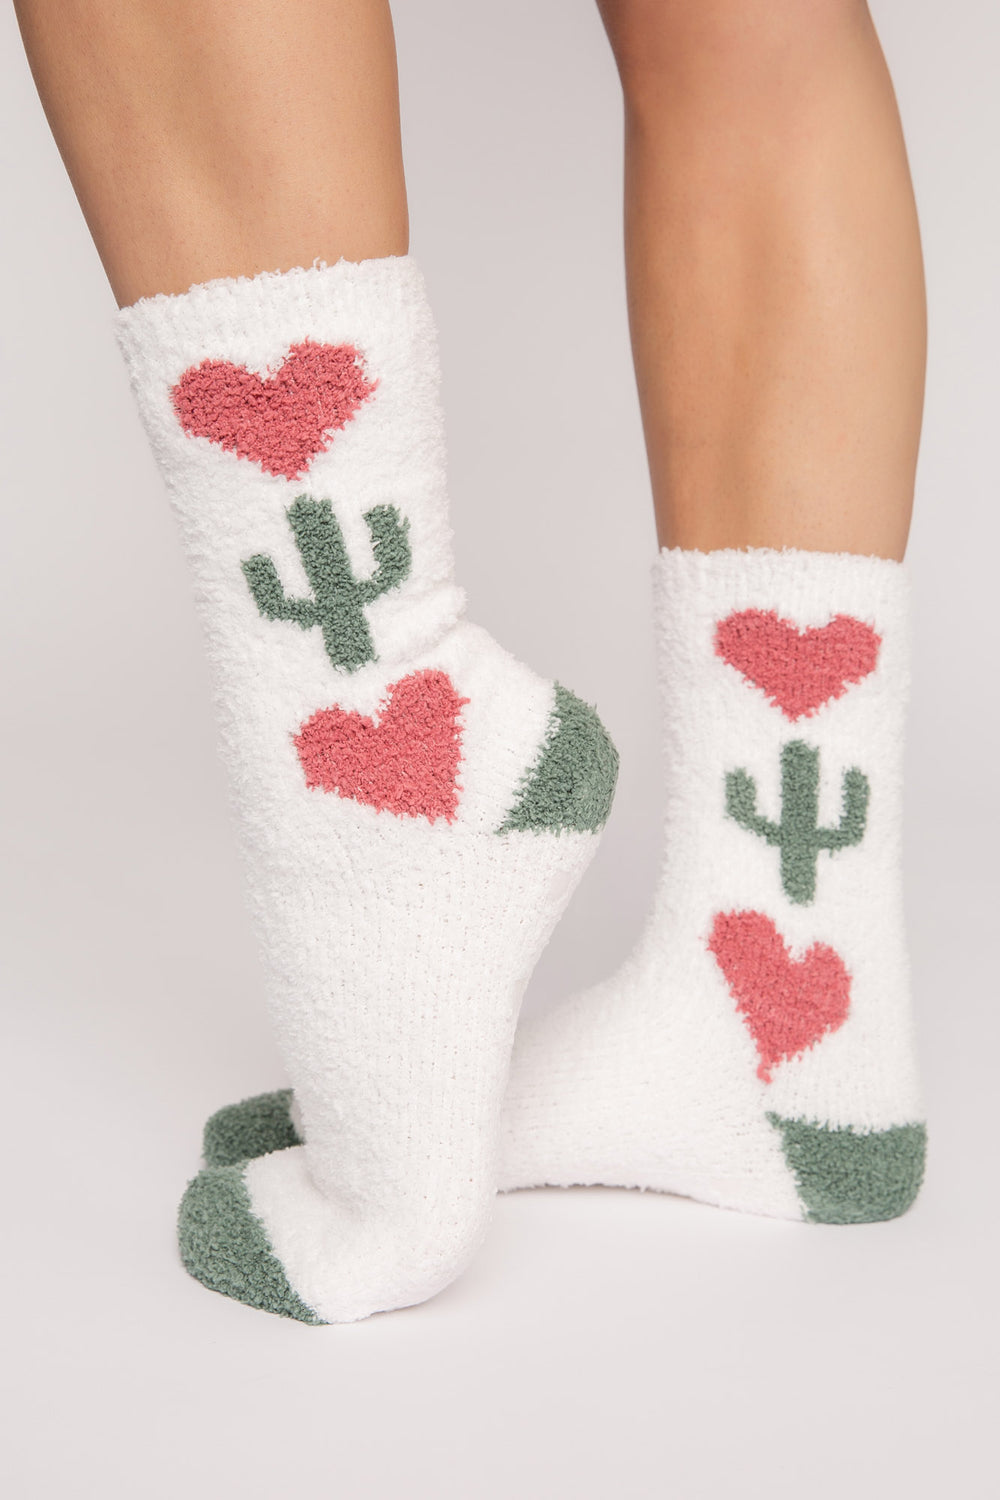 Ivory cozy plush socks with knitted hearts & cactus design. Clear-printed grippers on soles. (7231871582308)